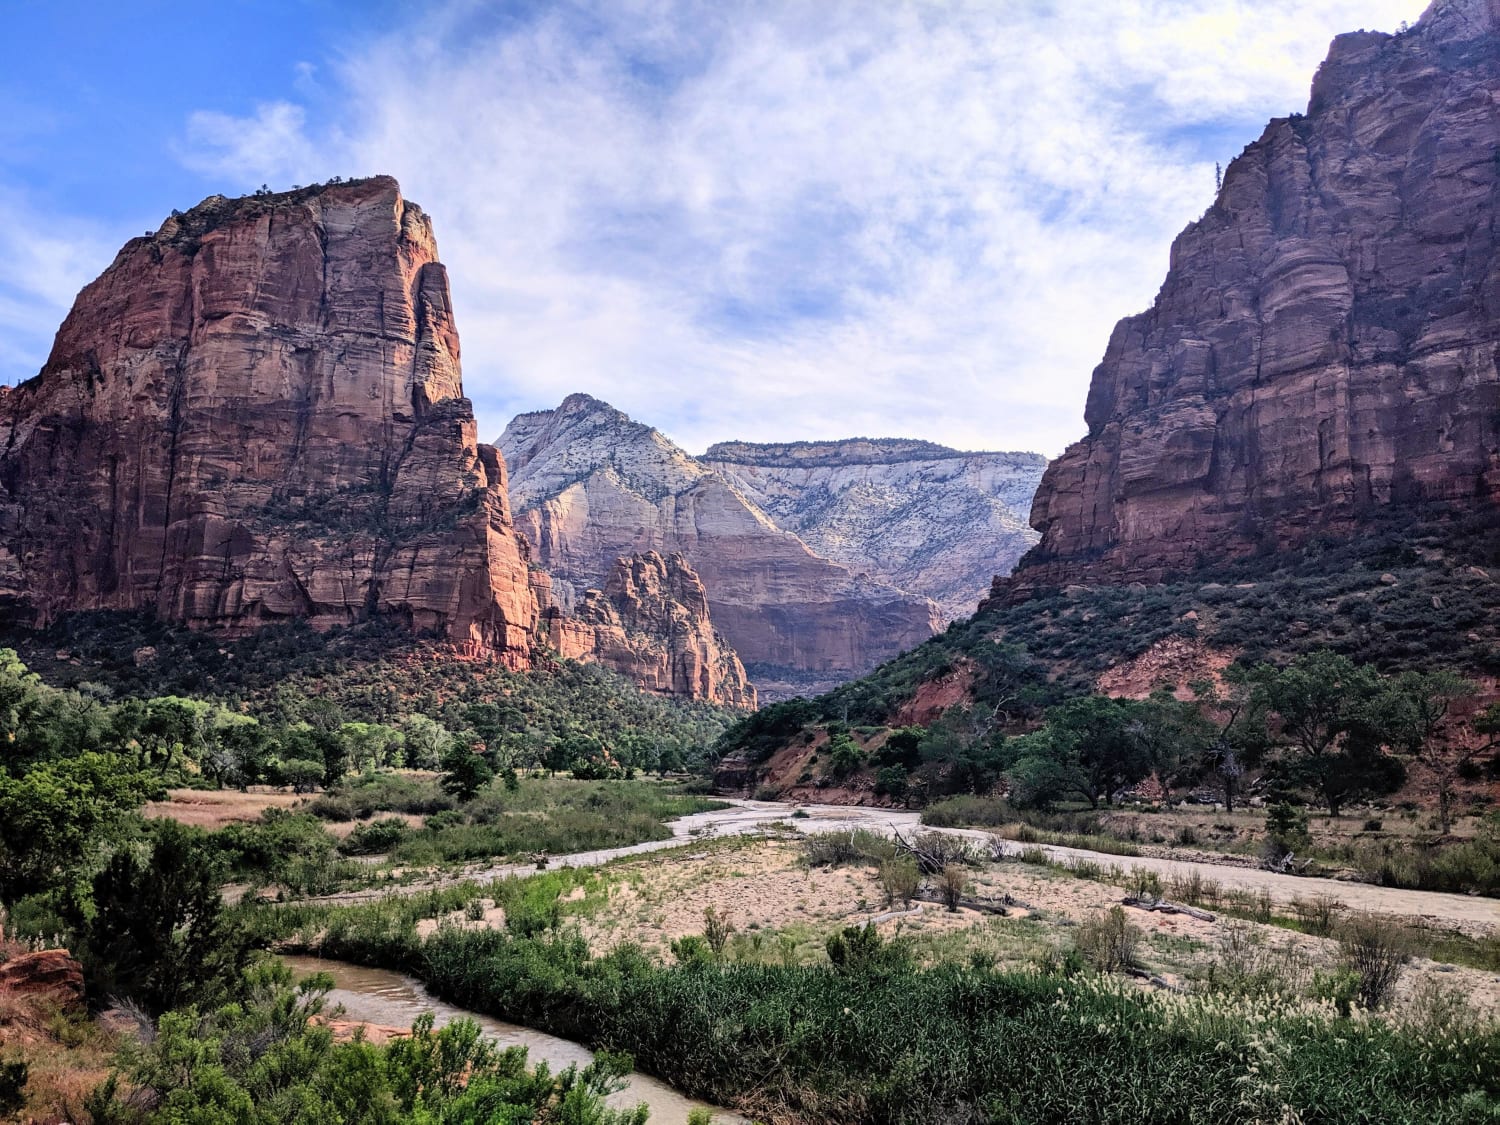 Zion National Park is well named, to say the least. Heaven would be having views like this from my backyard